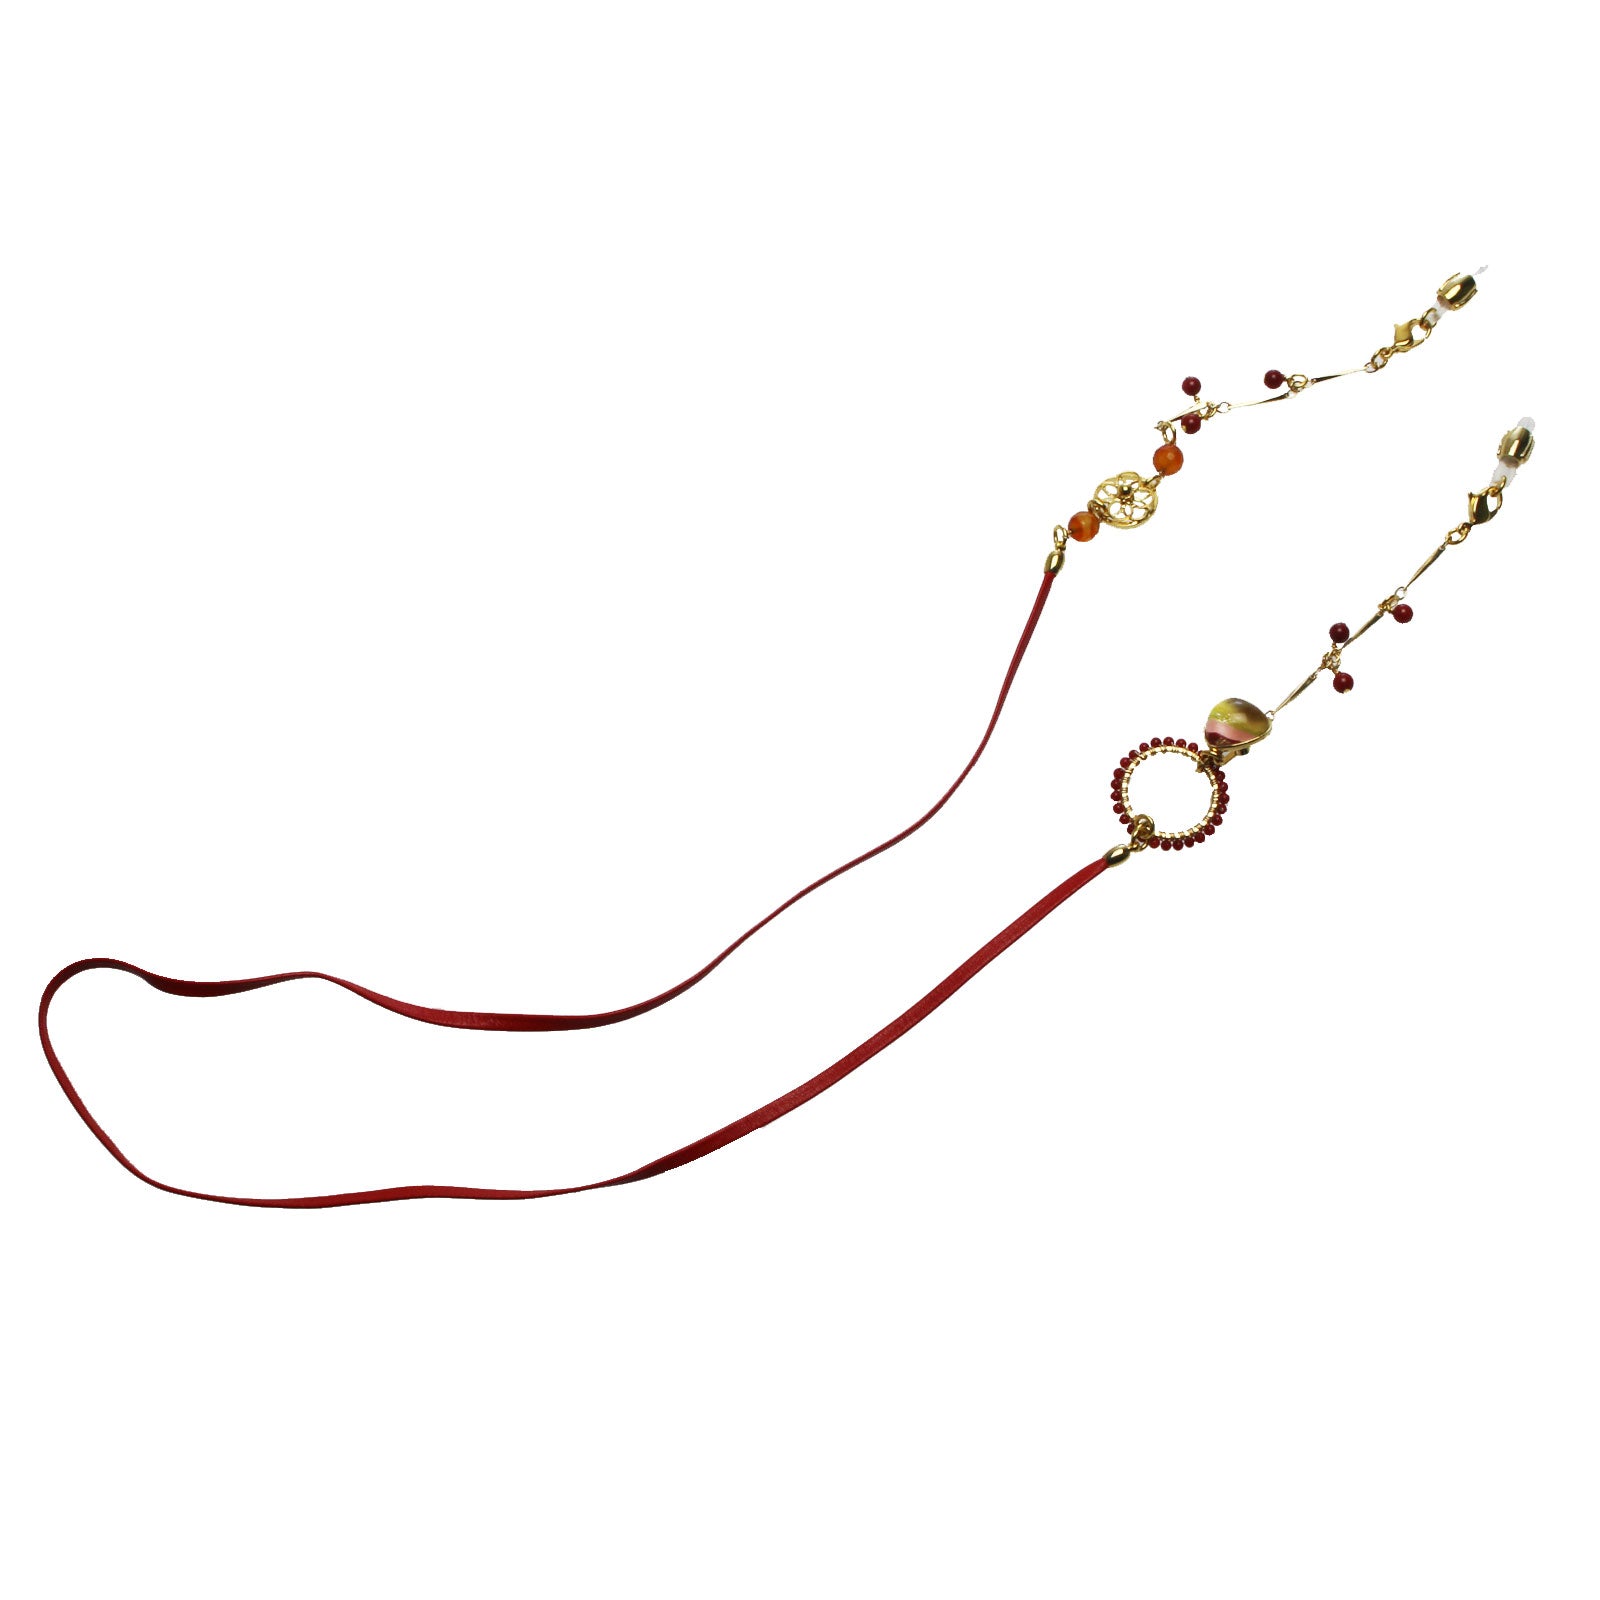 Eyeglass Chain Necklace Leather Rainbow Red TAMARUSAN